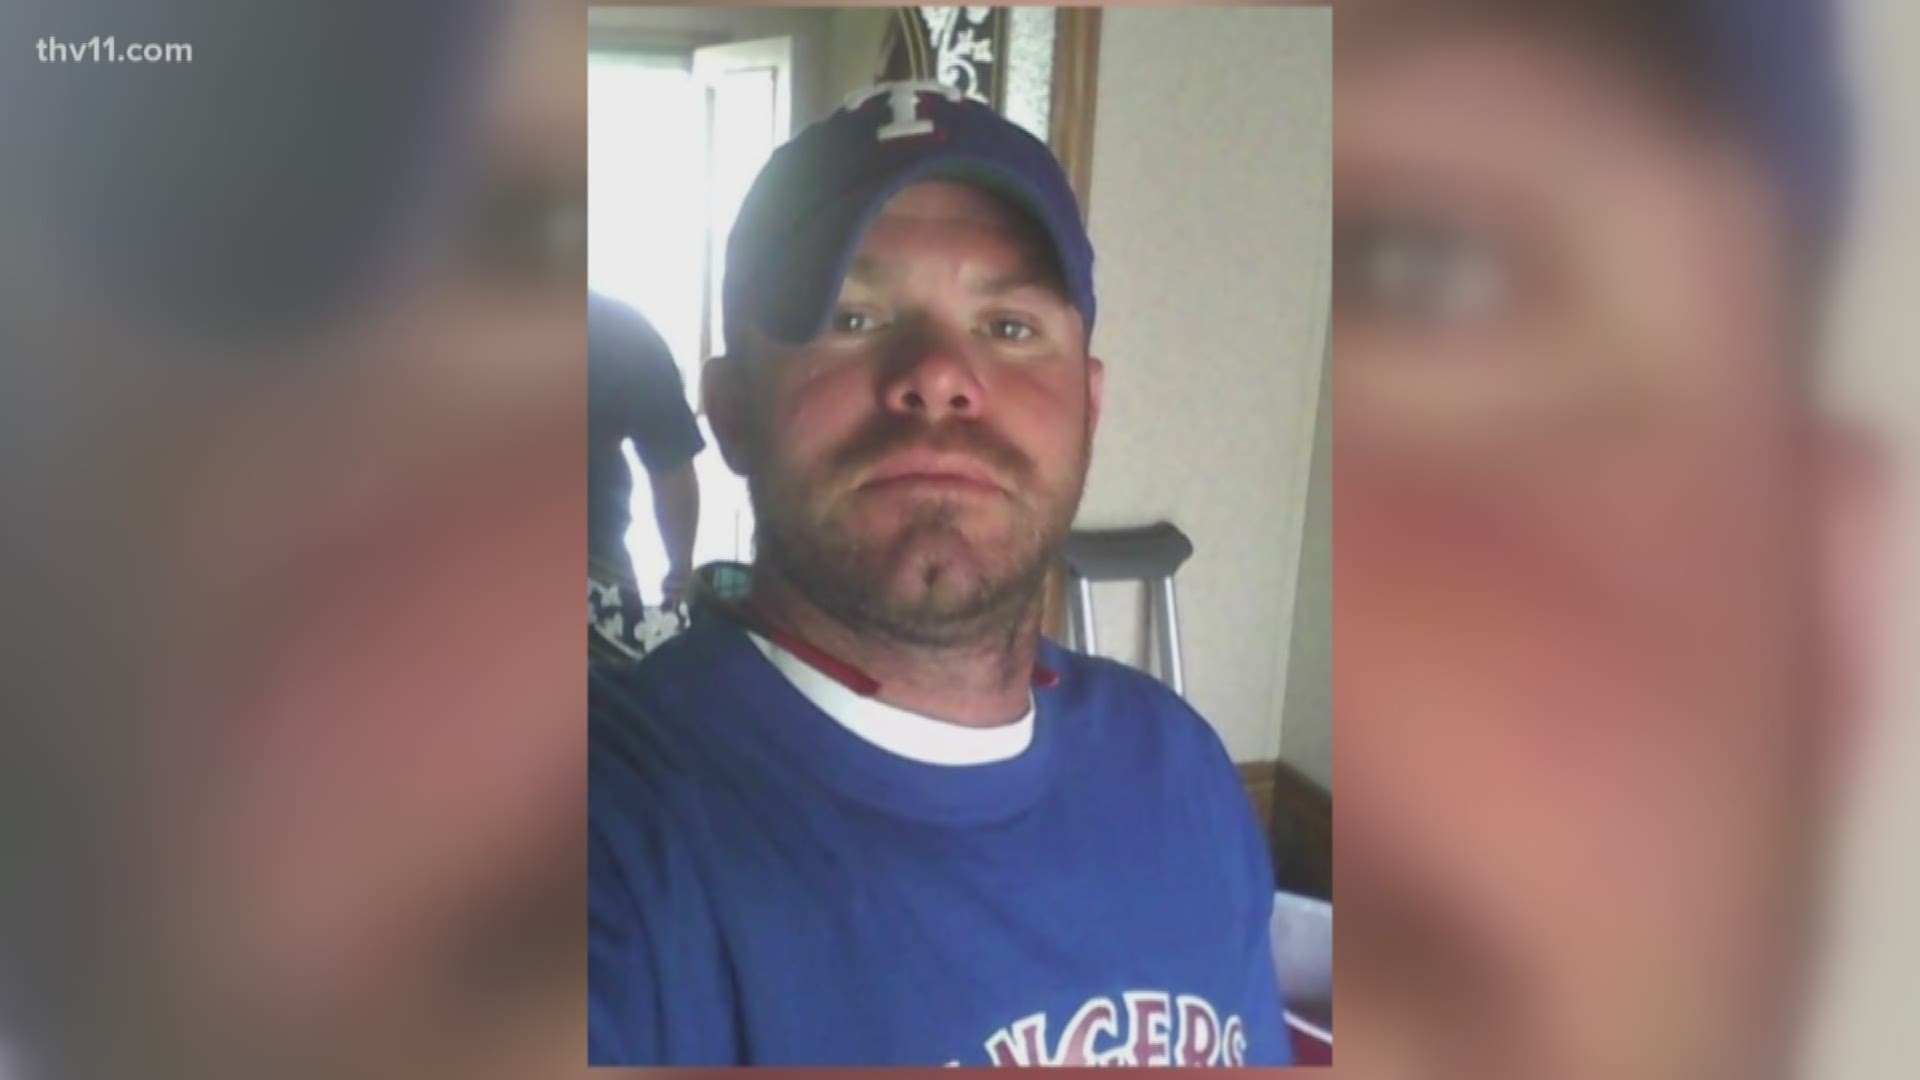 Investigators believe Brian Keith Freeman committed suicide in Royse City, Texas, after killing his ex-fiance in Ward, Arkansas back in March 2017.